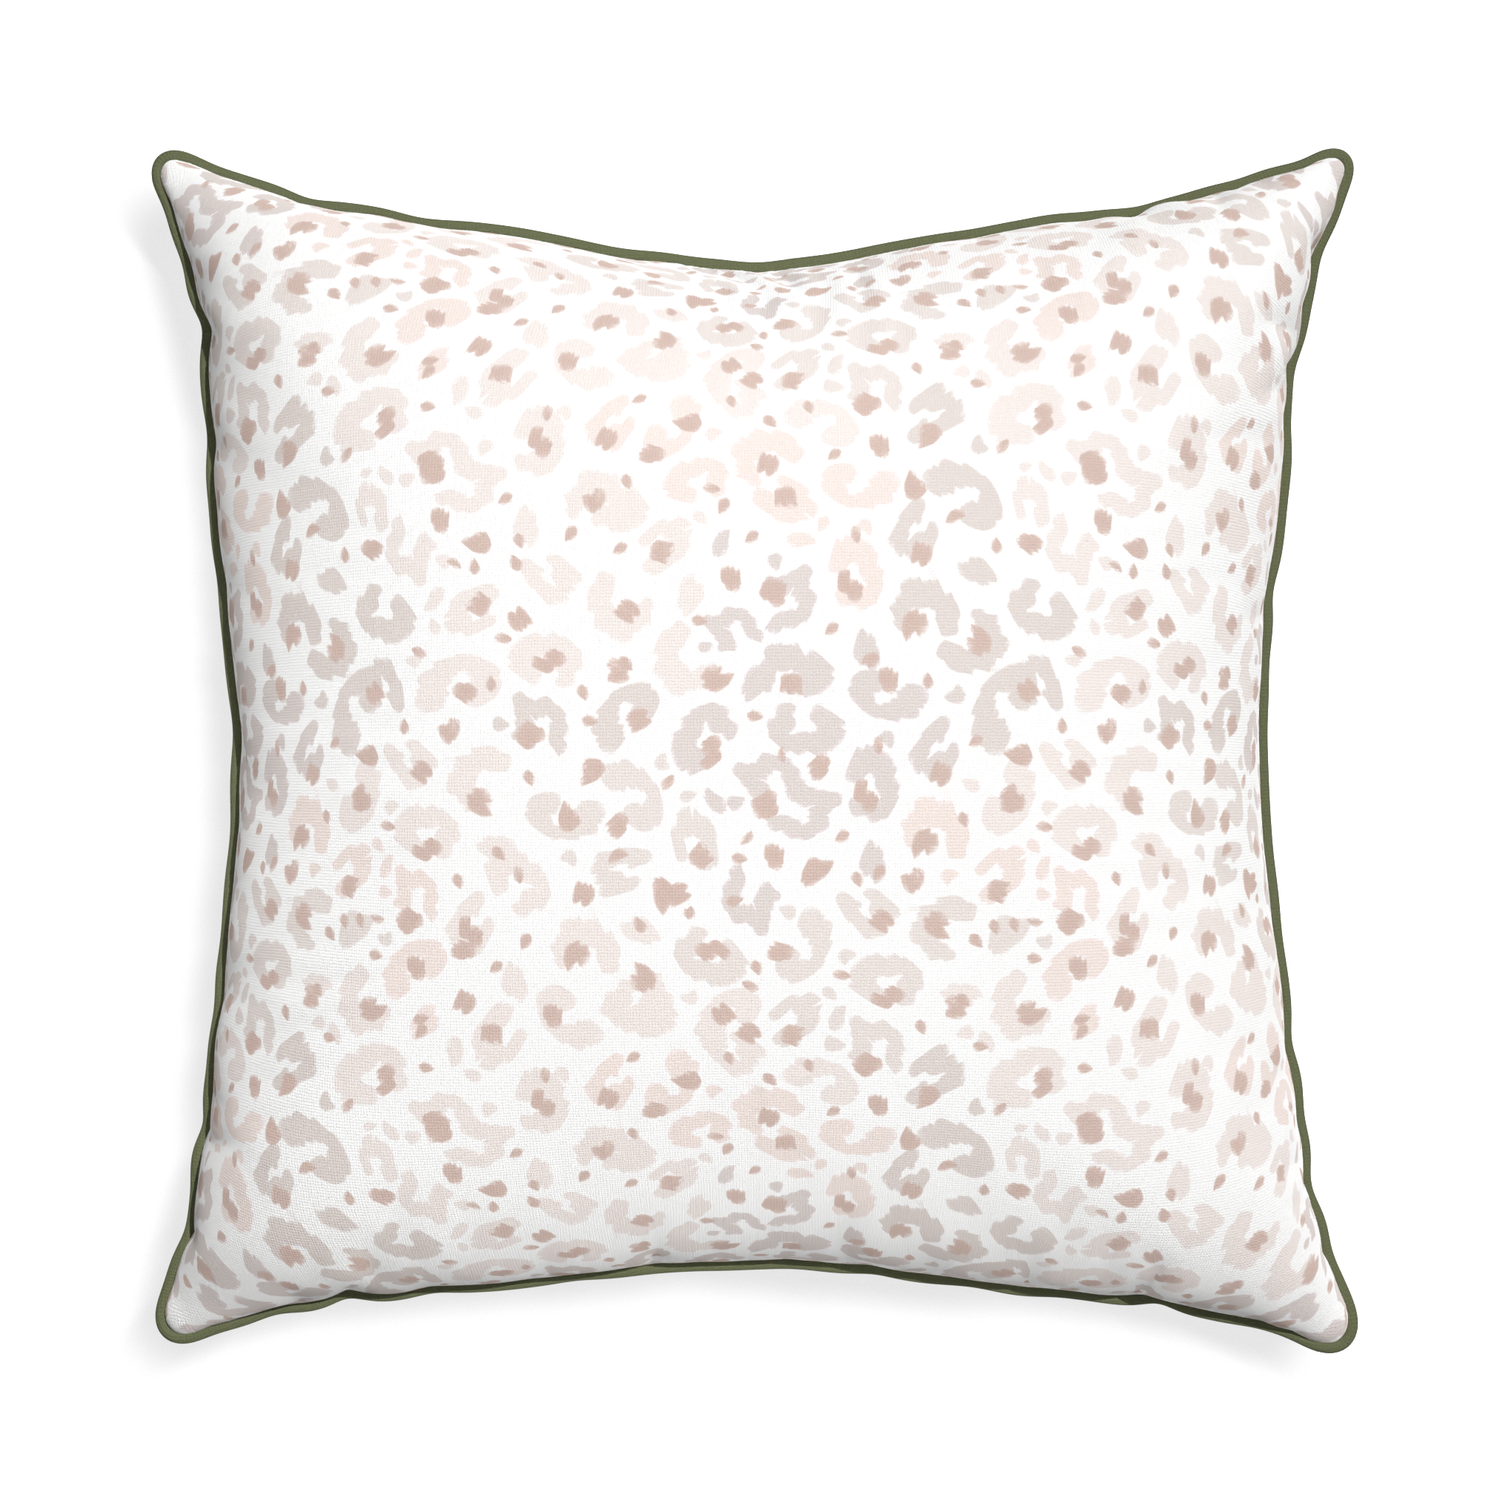 Euro-sham rosie custom beige animal printpillow with f piping on white background